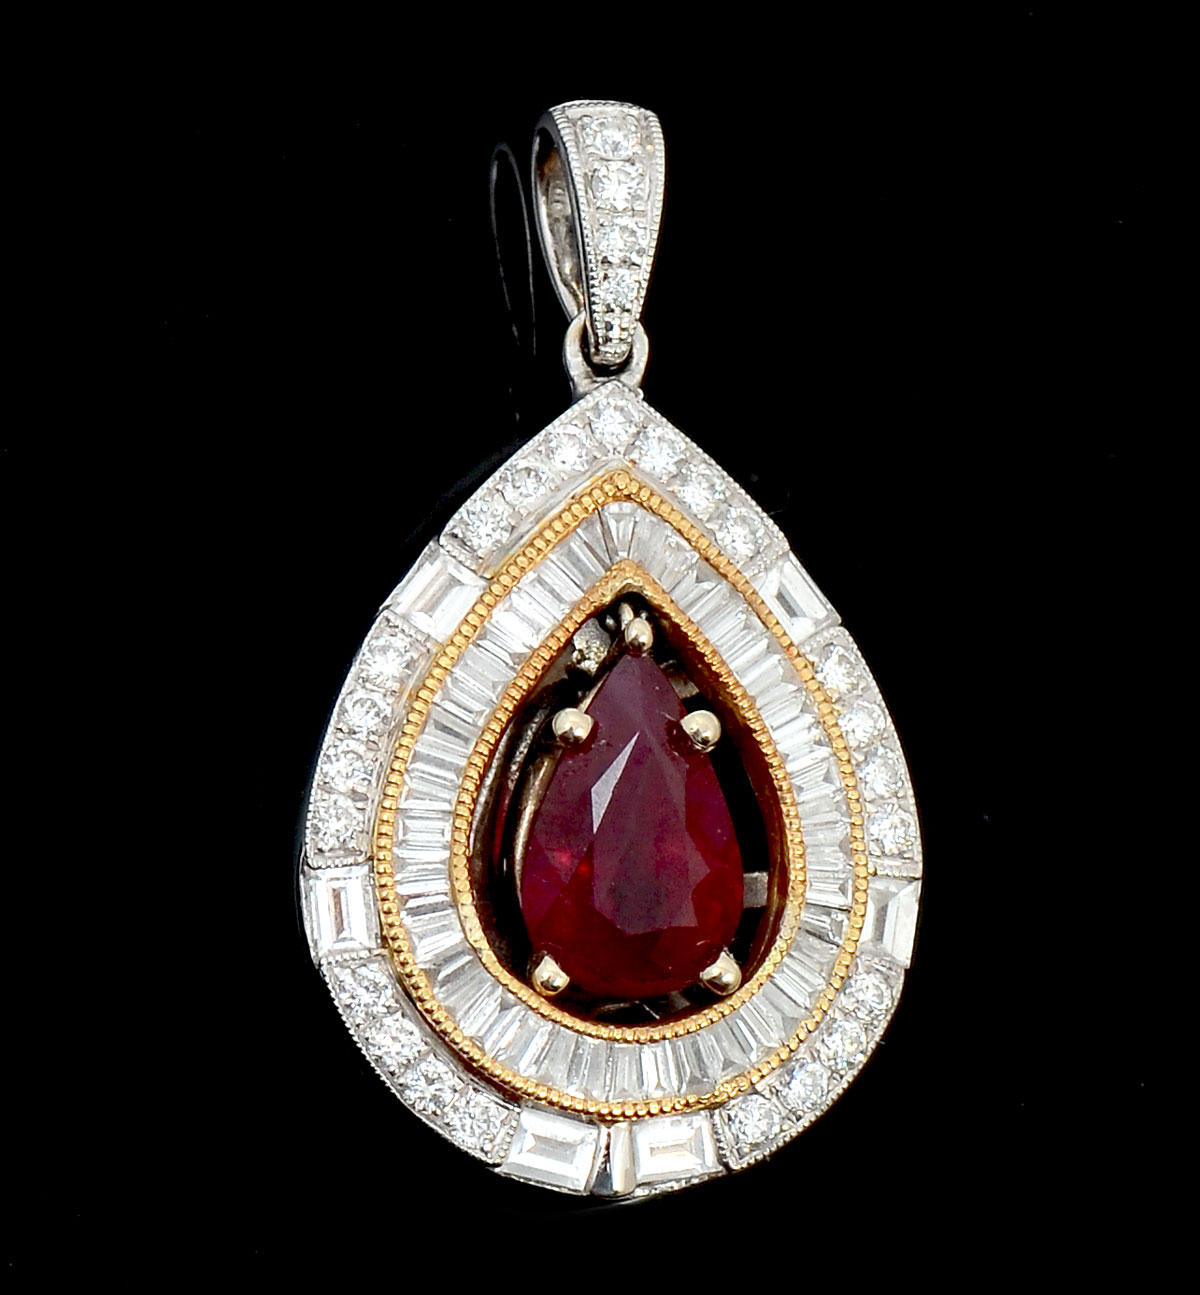 18K 1 50 CT RUBY PENDANT WITH 84 276b98